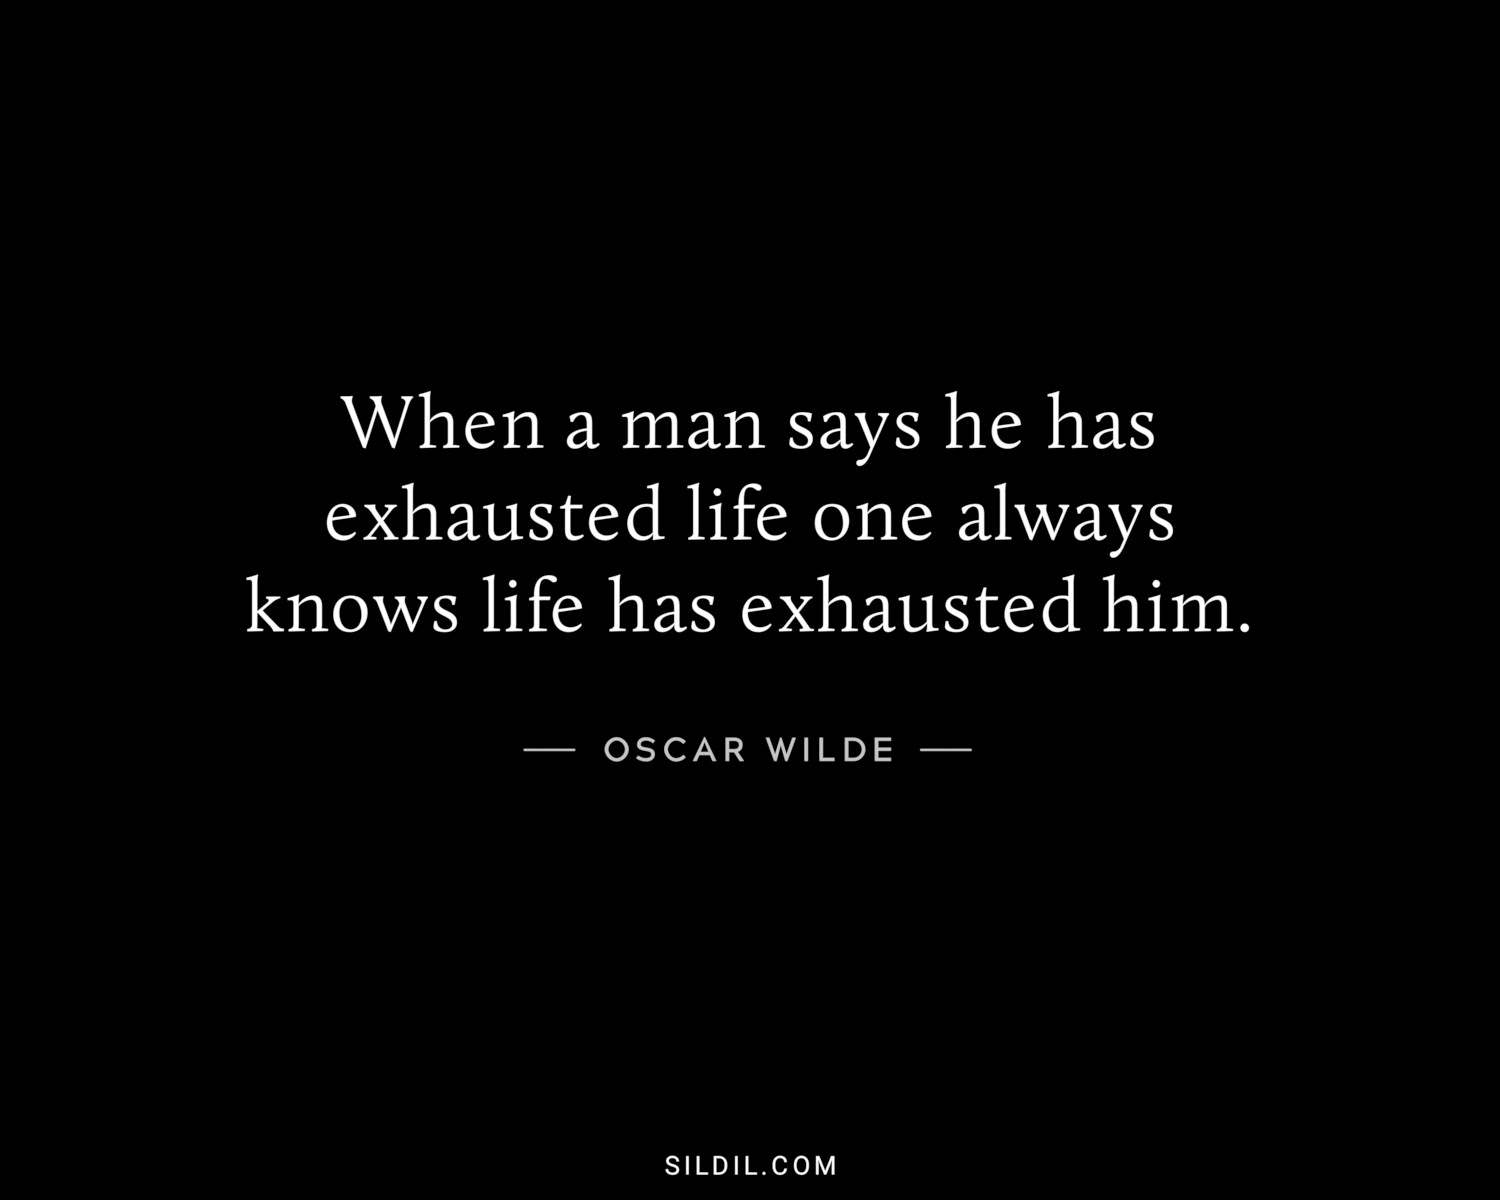 When a man says he has exhausted life one always knows life has exhausted him.